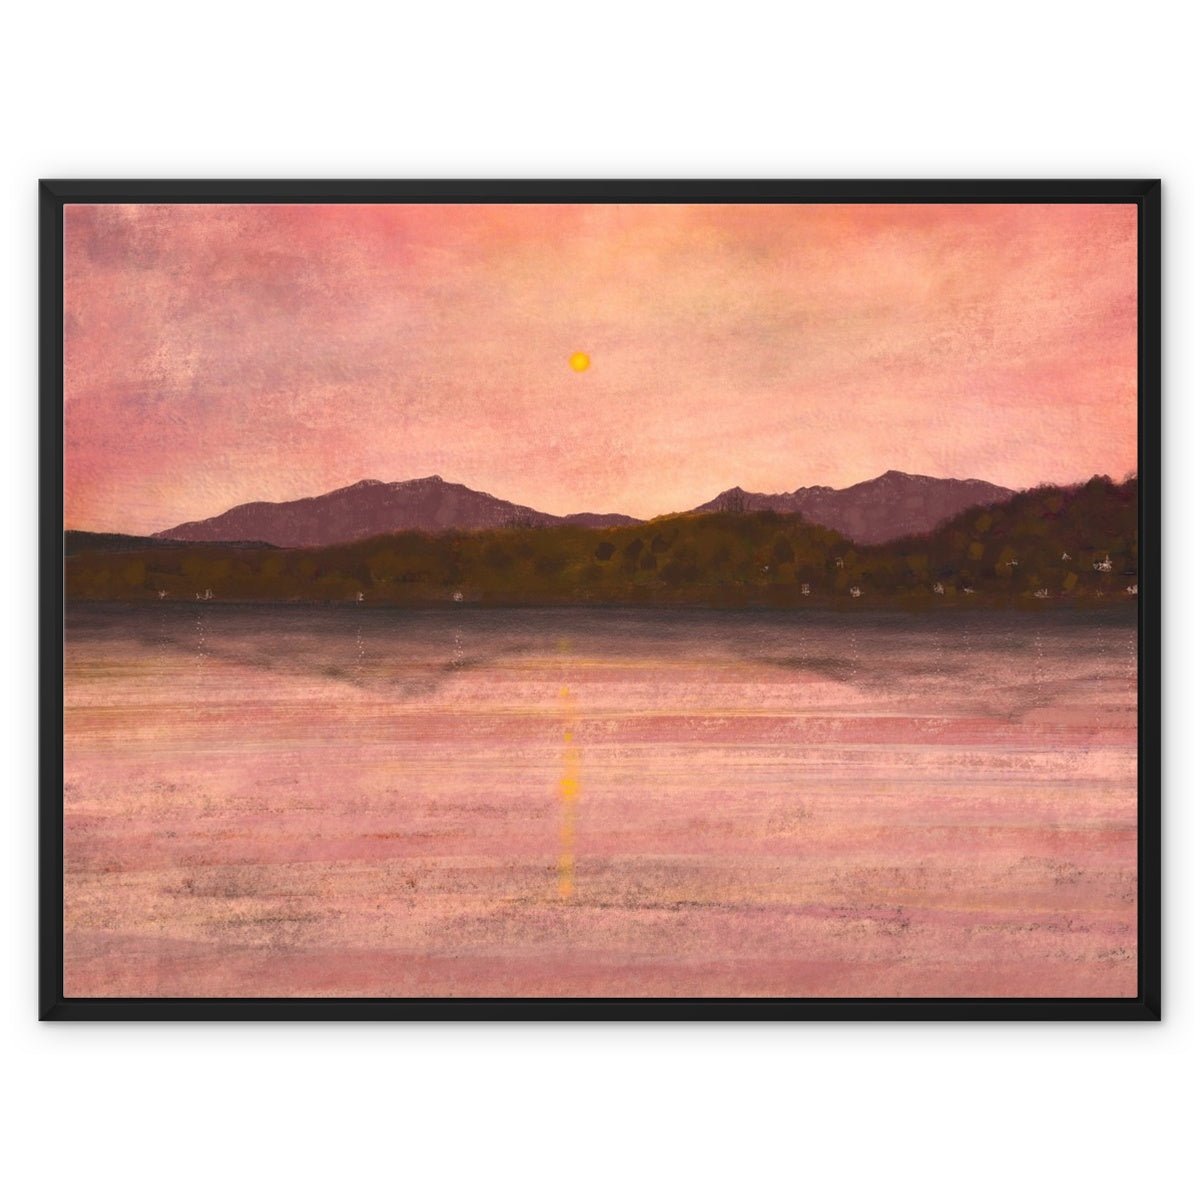 Dusk Over Arran & Bute Painting | Framed Canvas From Scotland-Floating Framed Canvas Prints-Arran Art Gallery-32"x24"-Black Frame-Paintings, Prints, Homeware, Art Gifts From Scotland By Scottish Artist Kevin Hunter